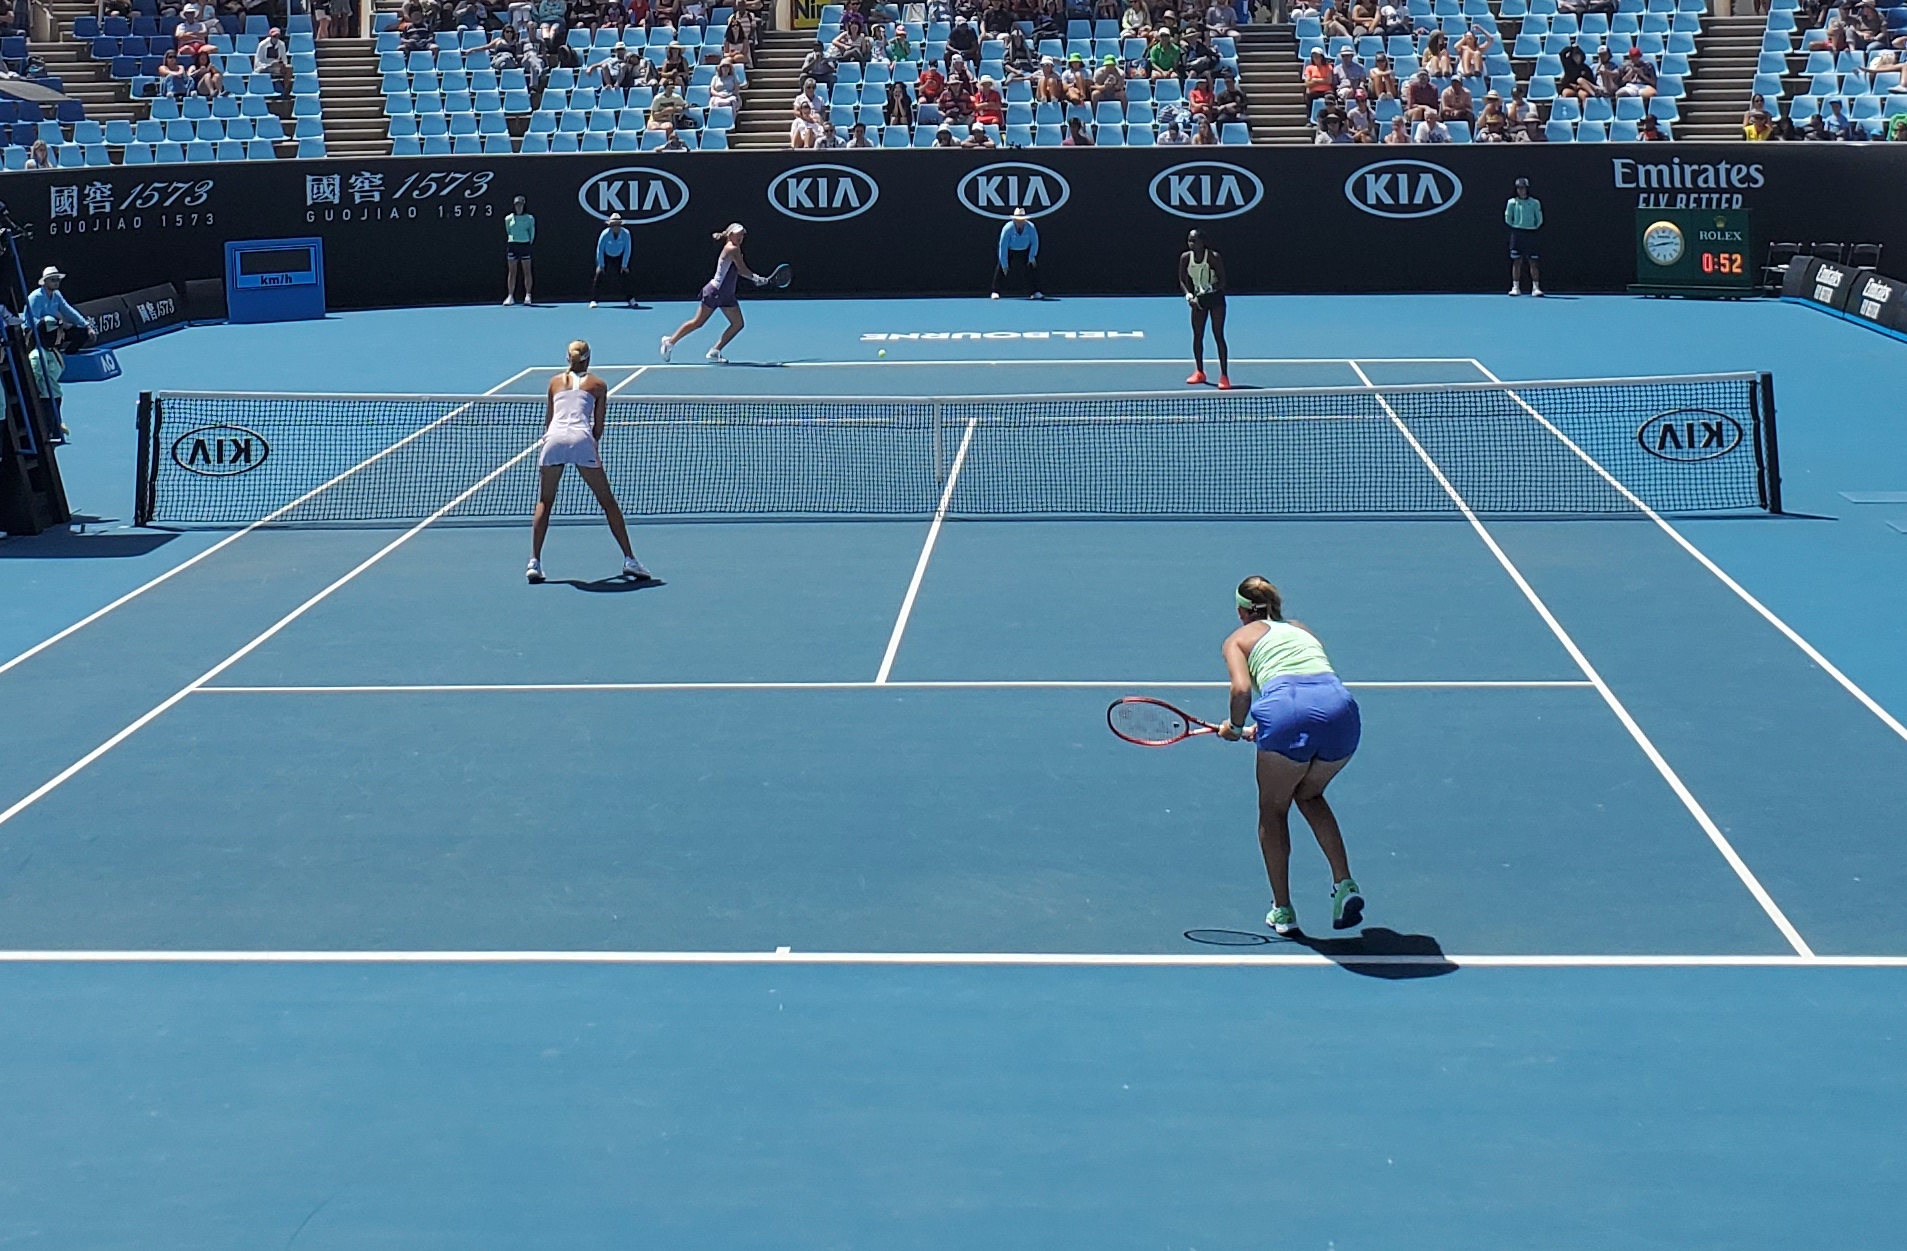 Big Doubles Match at the Australian Open